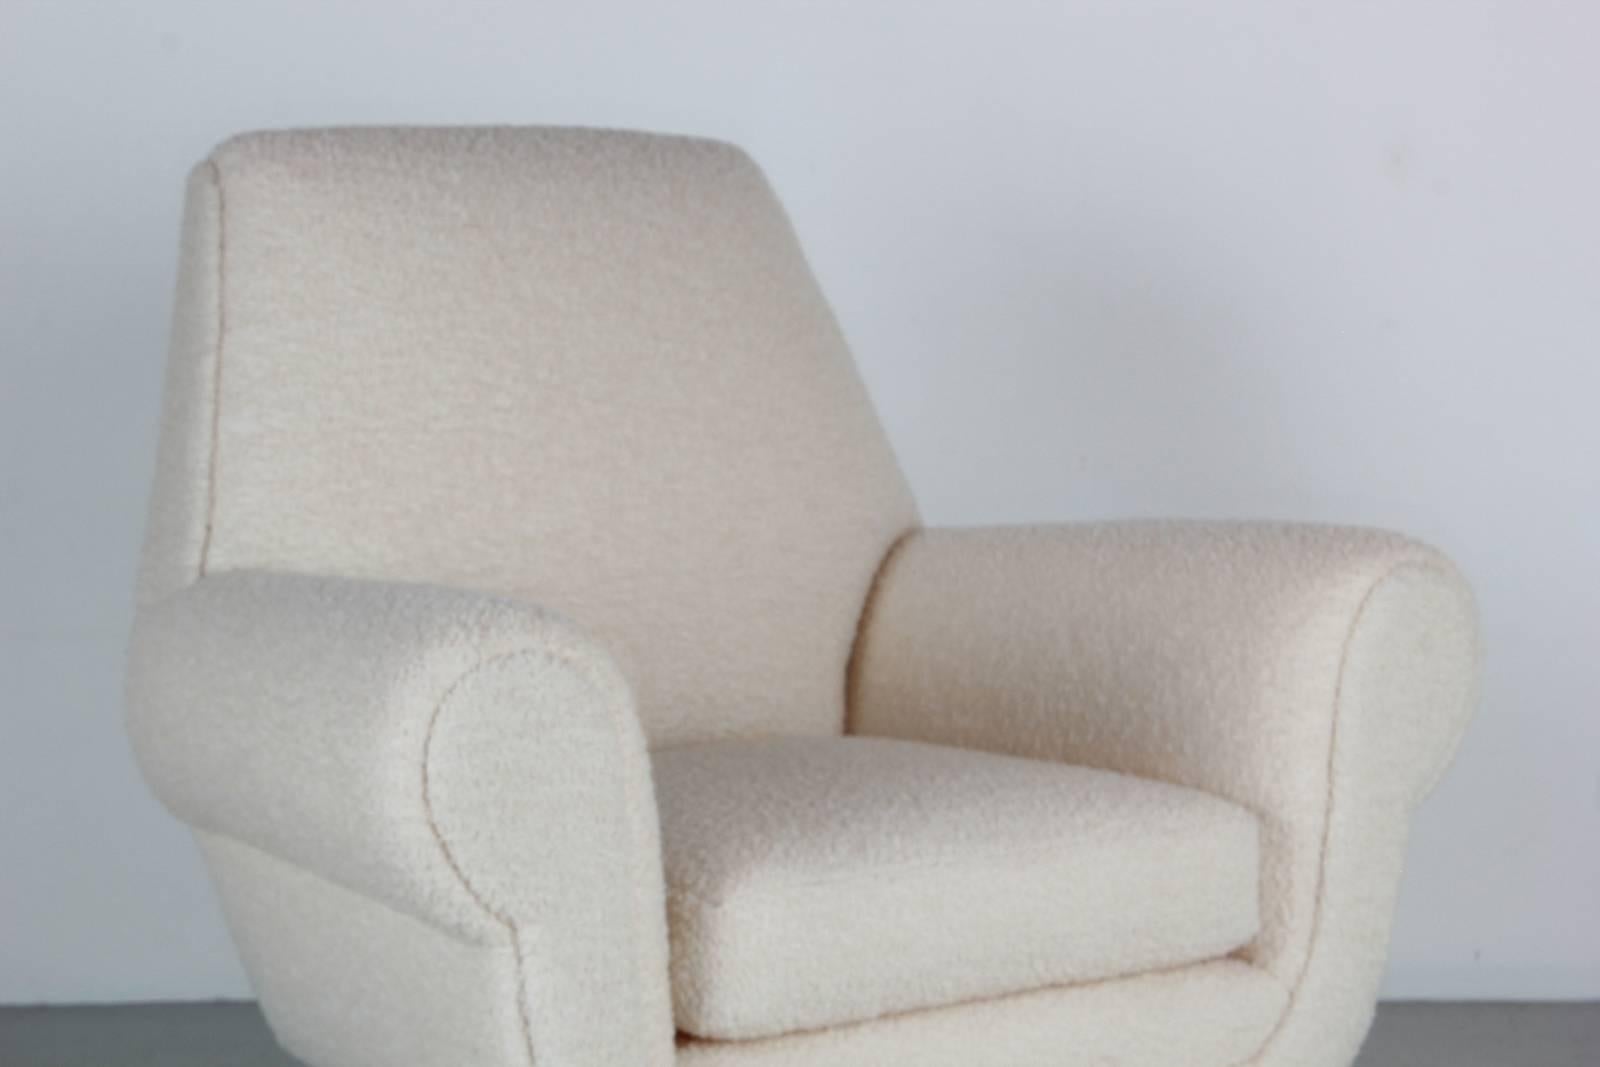 Fantastic Italian club chairs designed by Gigi Radici upholstered in a creamy white bouclé with polished brass legs.